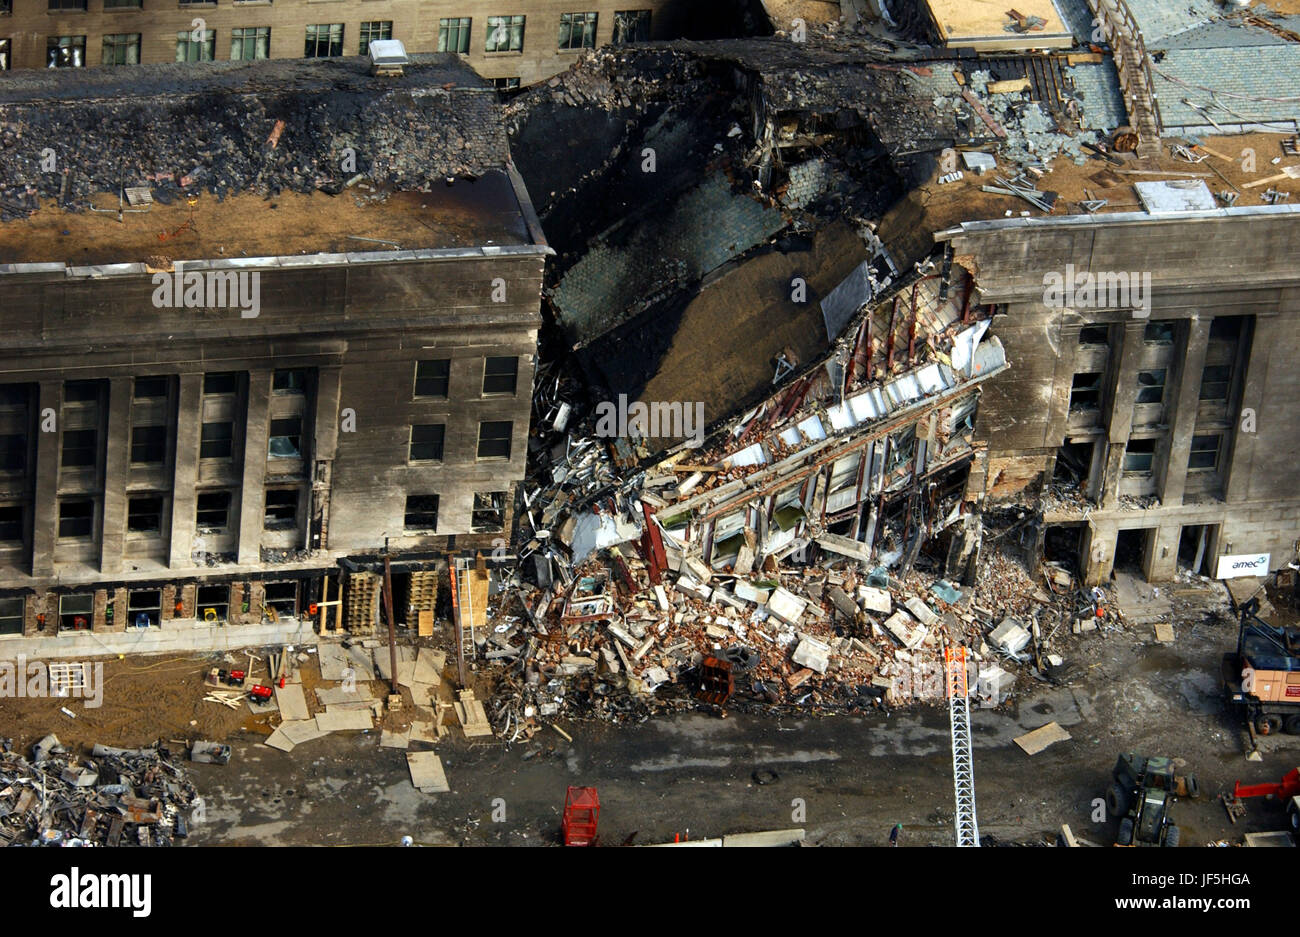 010914-F-8006R-001  This aerial photograph shot on Sept. 14, 2001, shows some of the destruction caused when the high-jacked American Airlines flight slammed into the Pentagon on Sept. 11.  The terrorist attack caused extensive damage to the west face of the building and followed similar attacks on the twin towers of the World Trade Center in New York City.   DoD photograph by Tech. Sgt. Cedric H. Rudisill. Stock Photo